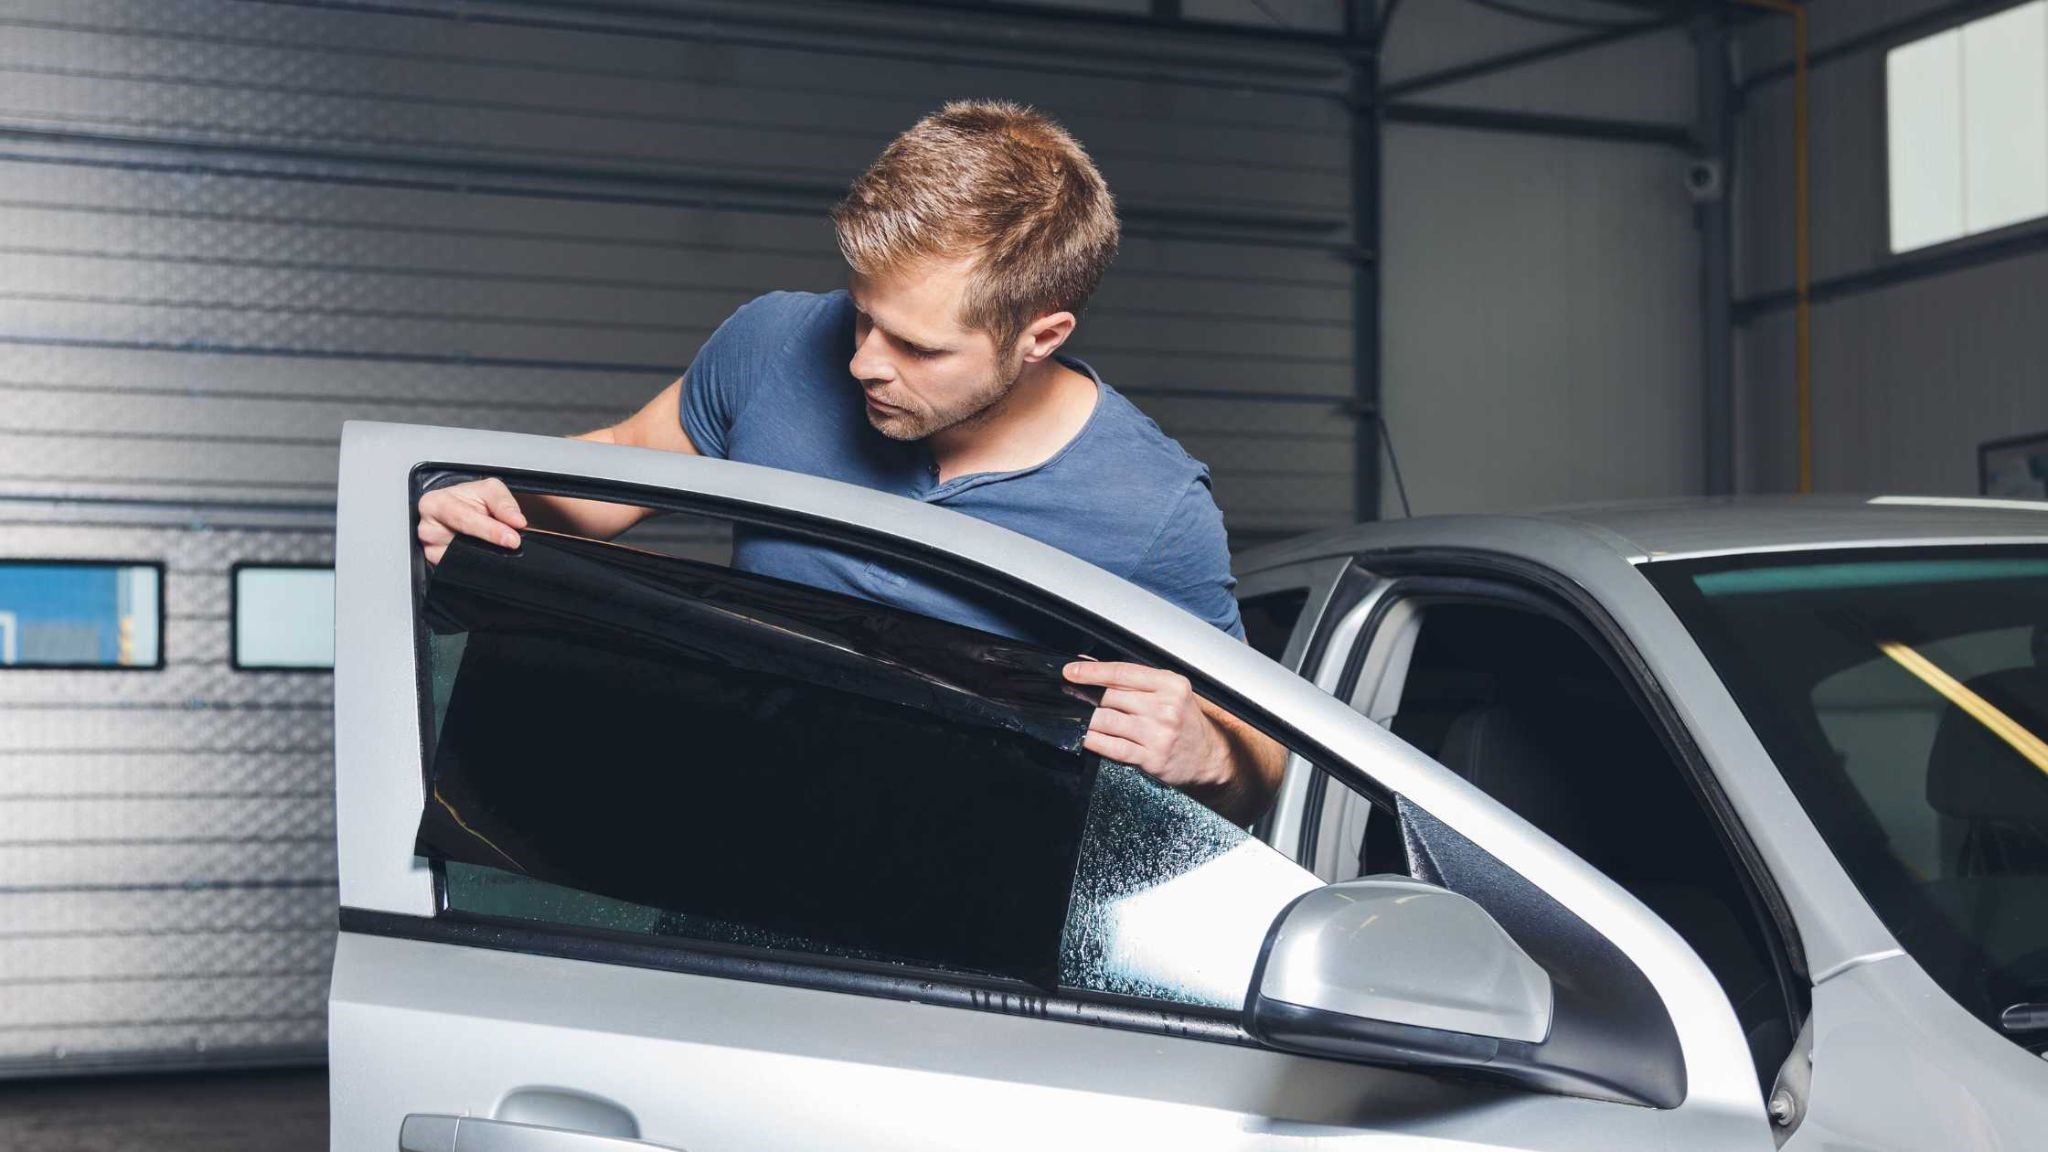 Tinted Windows and Legal Limits: What You Need to Know